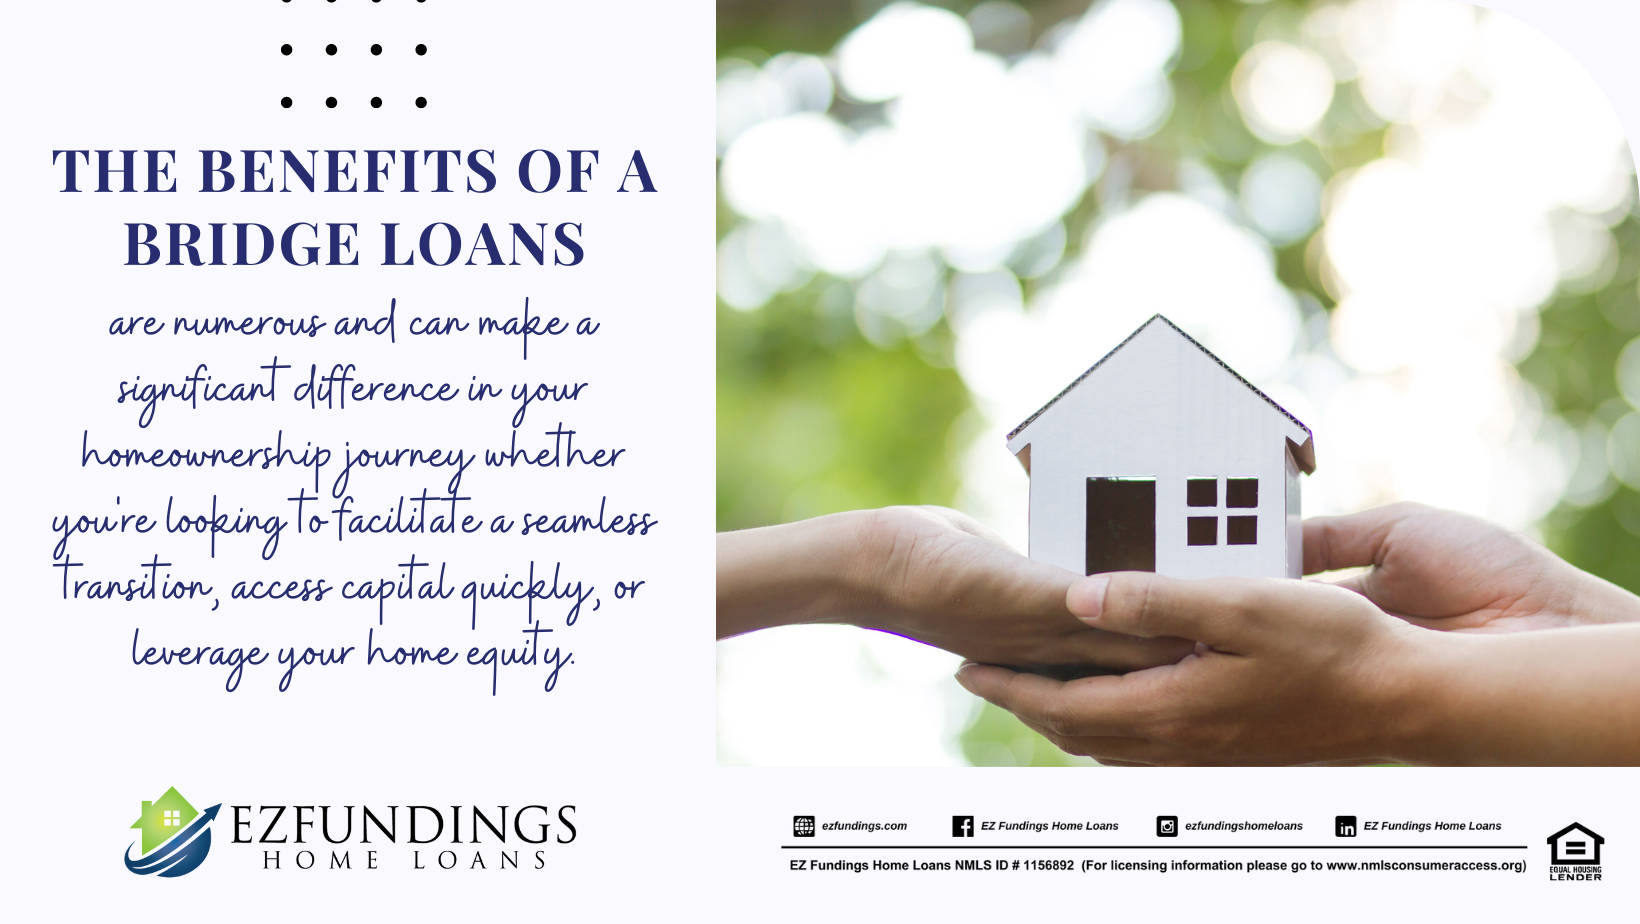 Mortgages: Benefits Of A Bridge Loan - Explore seamless transitions, quick capital access, avoiding contingency sales, flexible moving, and more with a bridge loan.